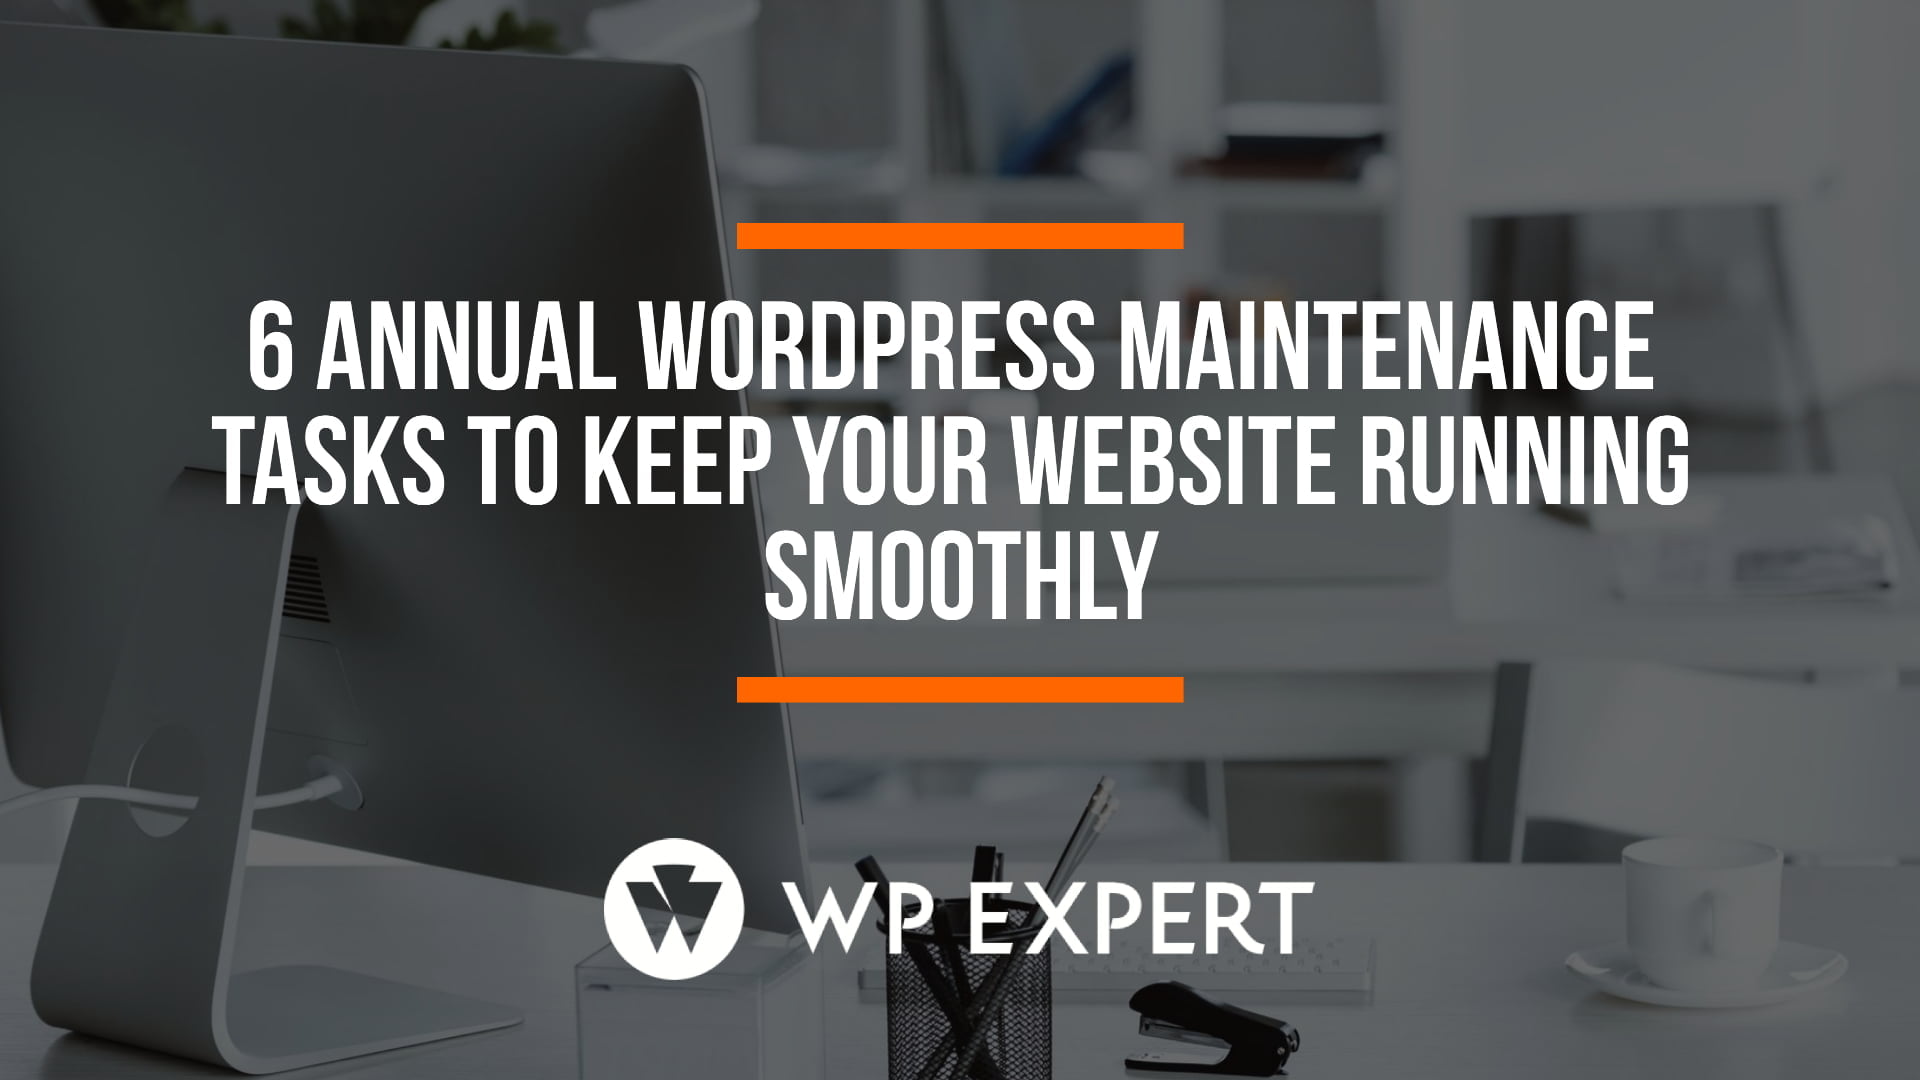 6 Annual WordPress Maintenance Tasks To Keep Your Website Running Smoothly